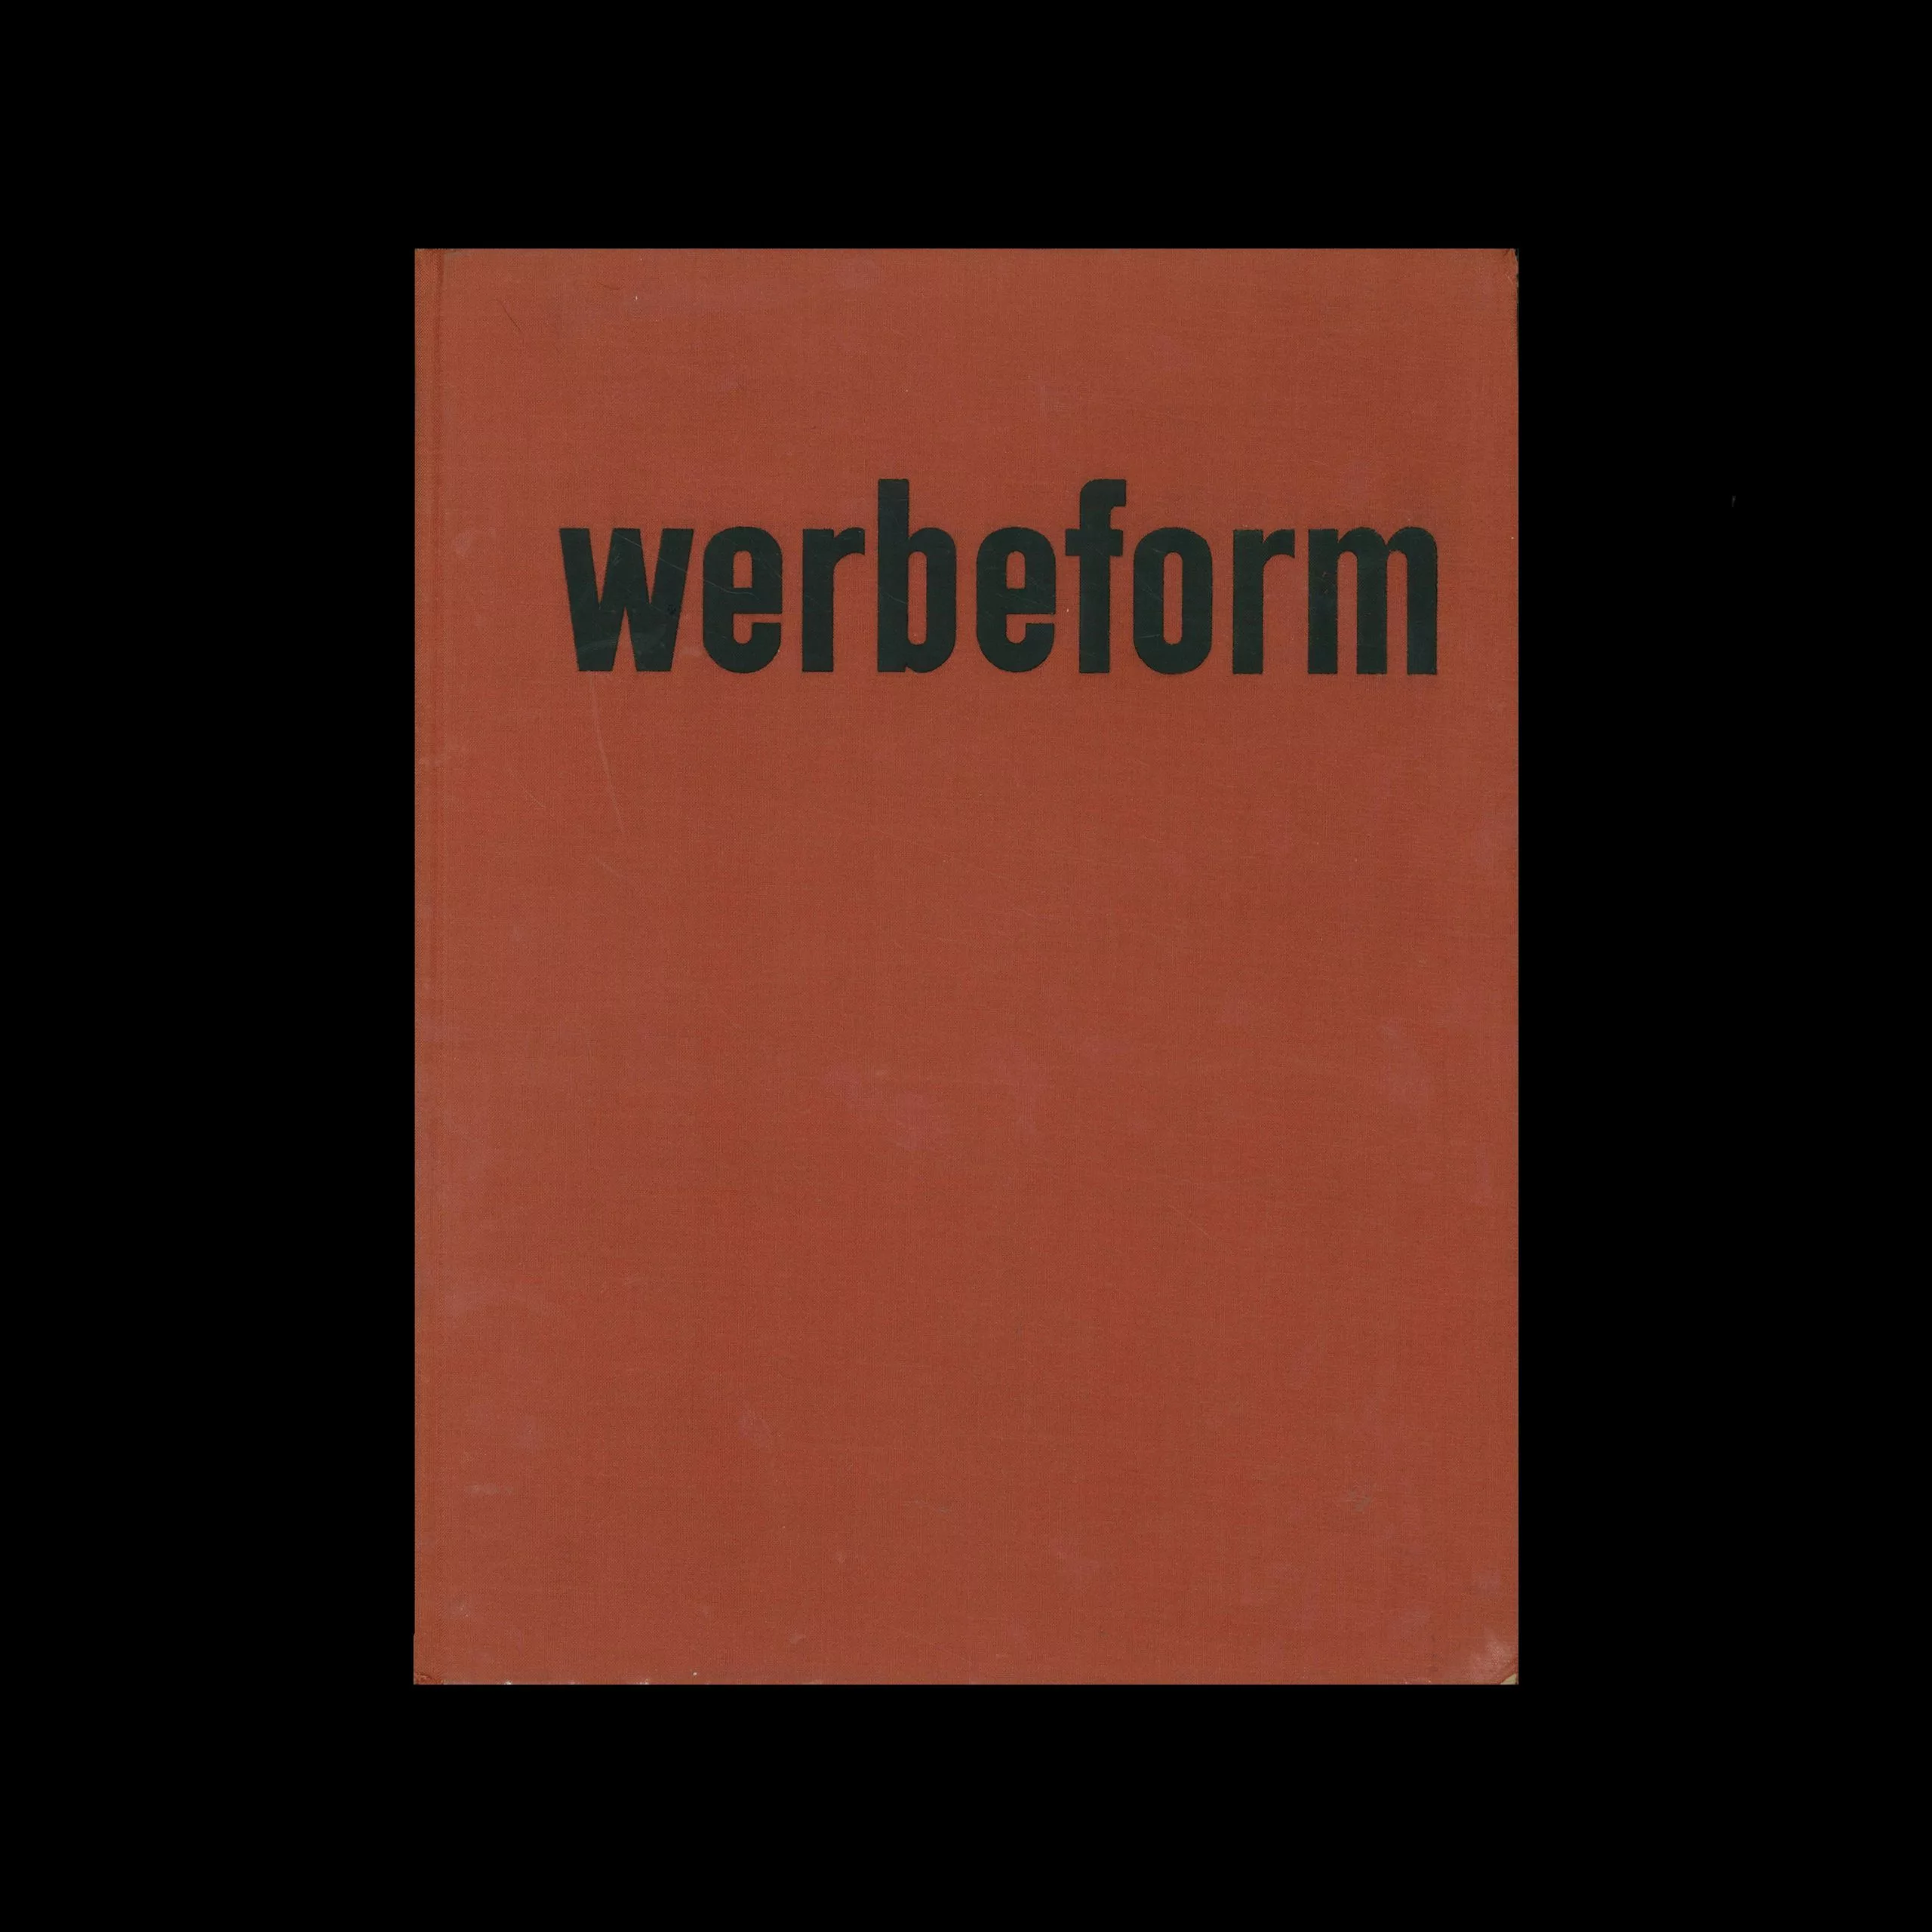 Werbeform, Annual Review Of Advertising And Design, 1954